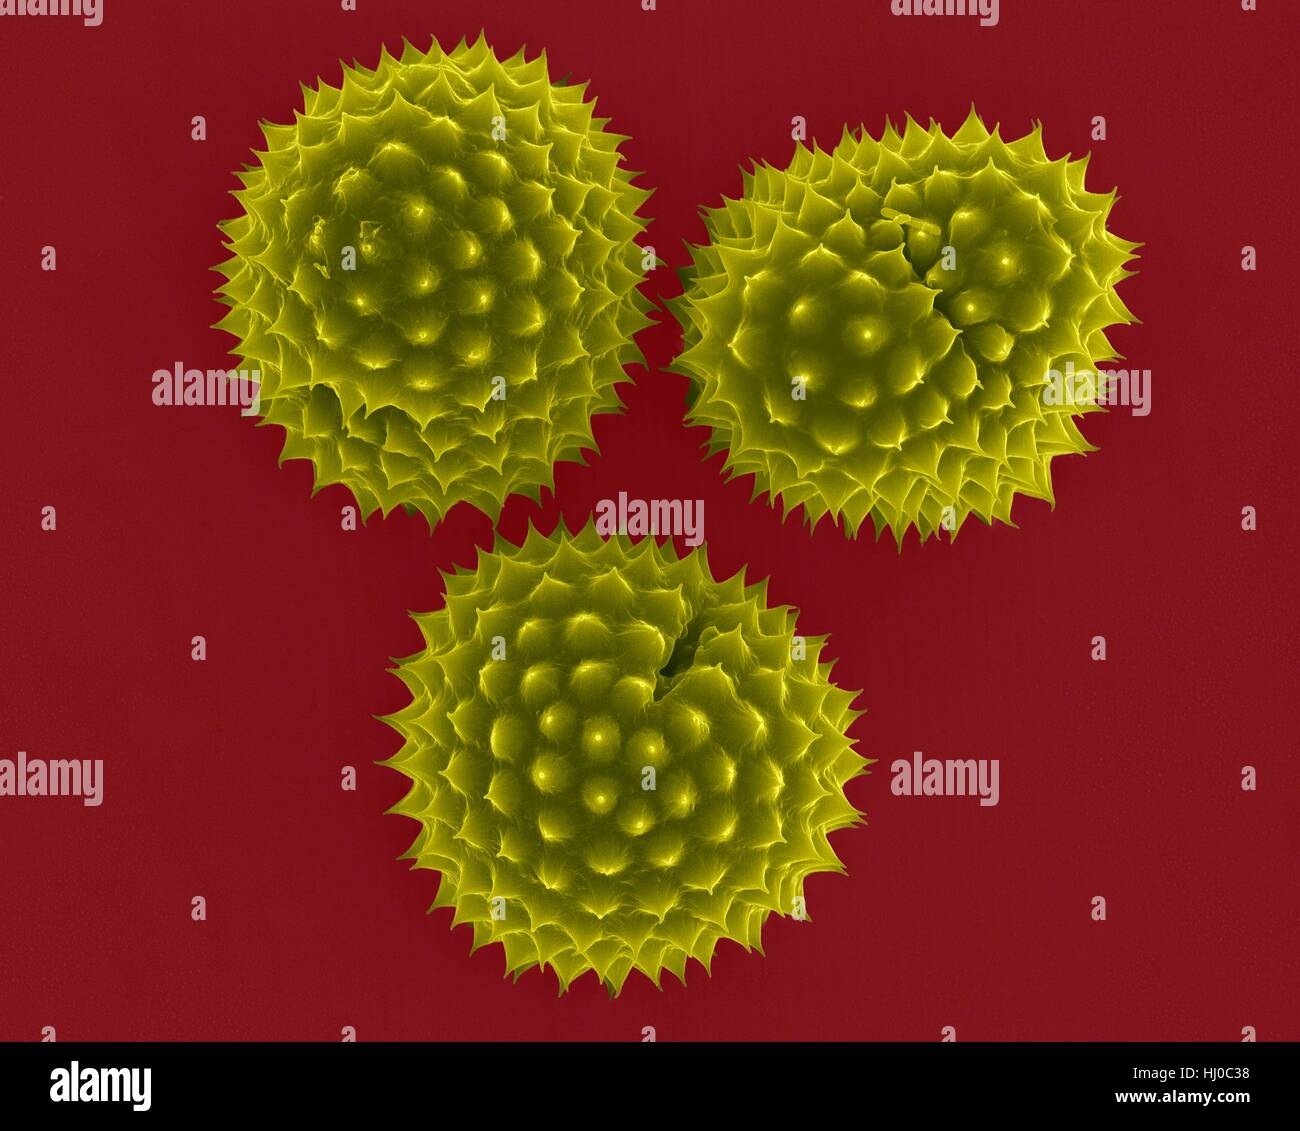 Ragweed (Ambrosia psilostachya) pollen,coloured scanning electron micrograph (SEM).This pollen is allergen.Ragweed is main cause of weed allergies.Ragweed pollen is notorious for causing allergic reactions in humans,specifically allergic rhinitis.Up to half of all cases of pollen-related allergic Stock Photo